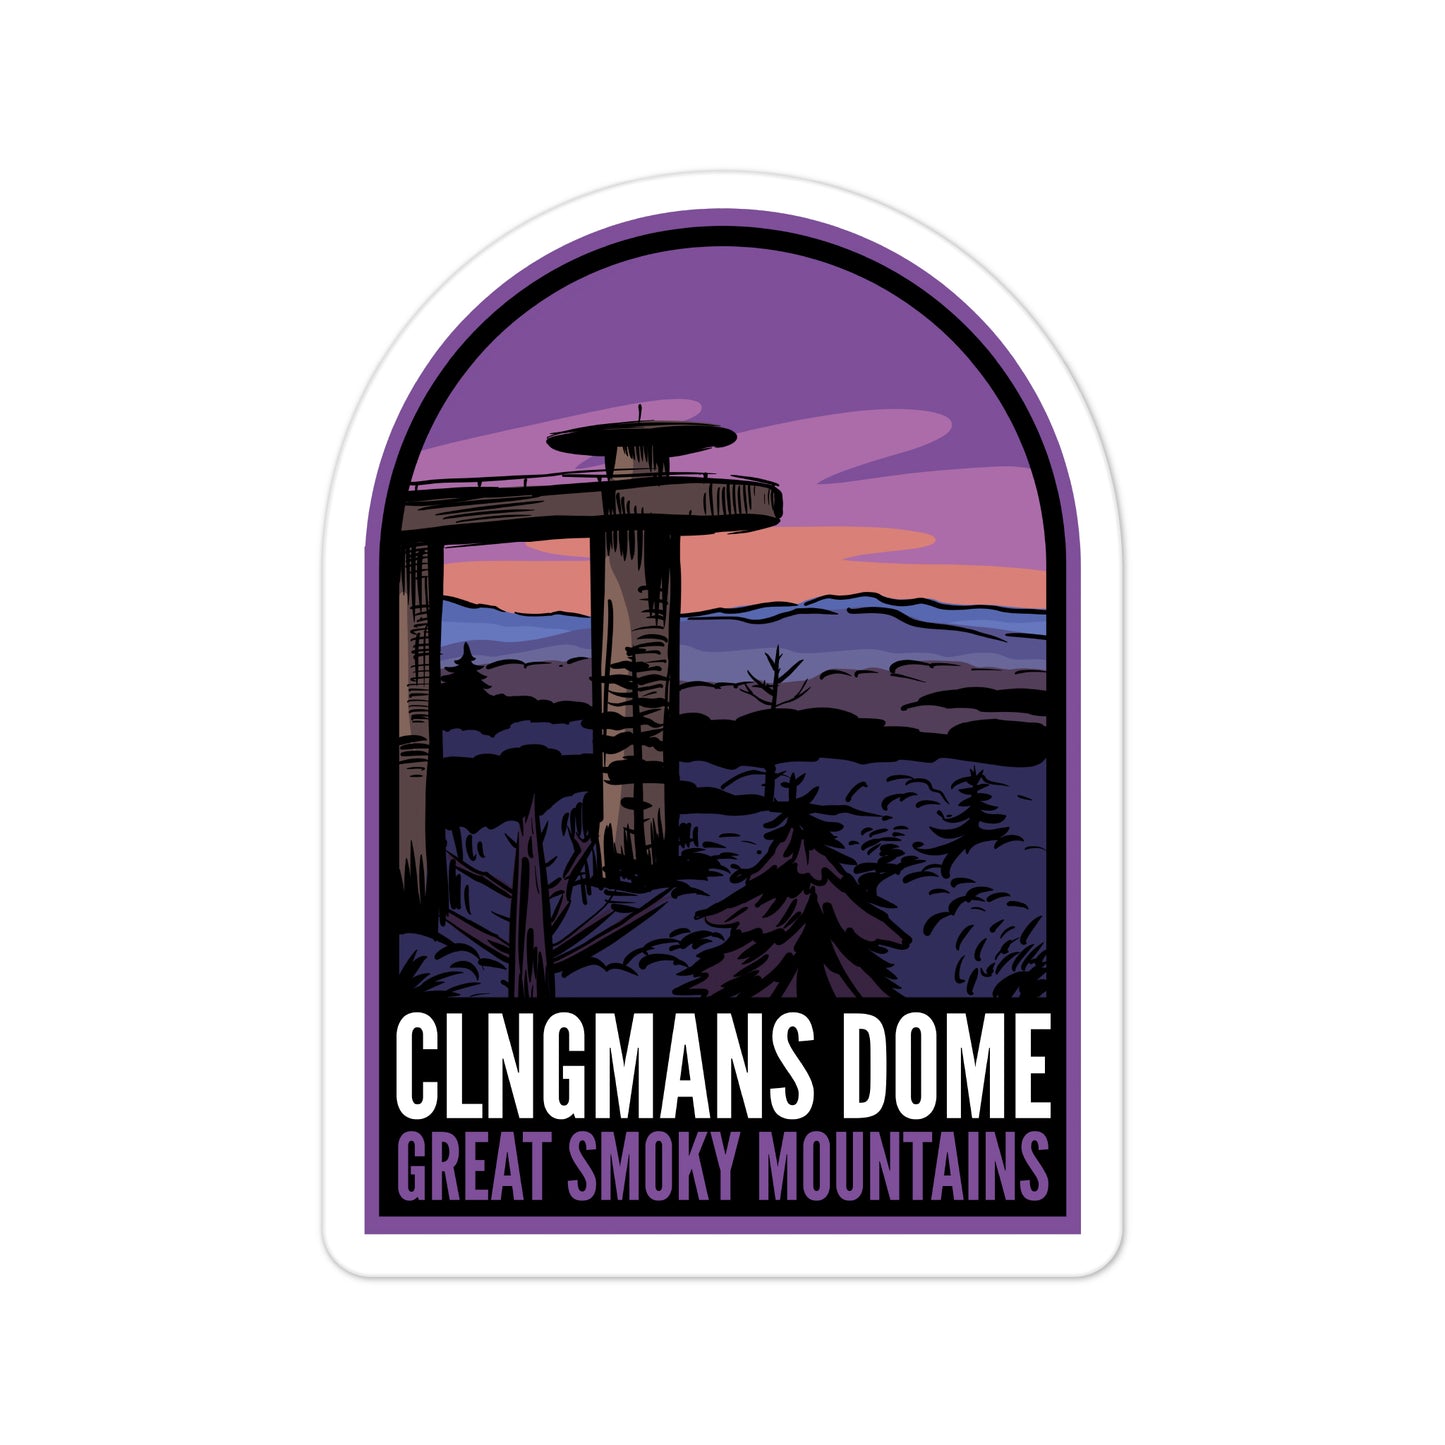 A sticker of Clingmans Dome